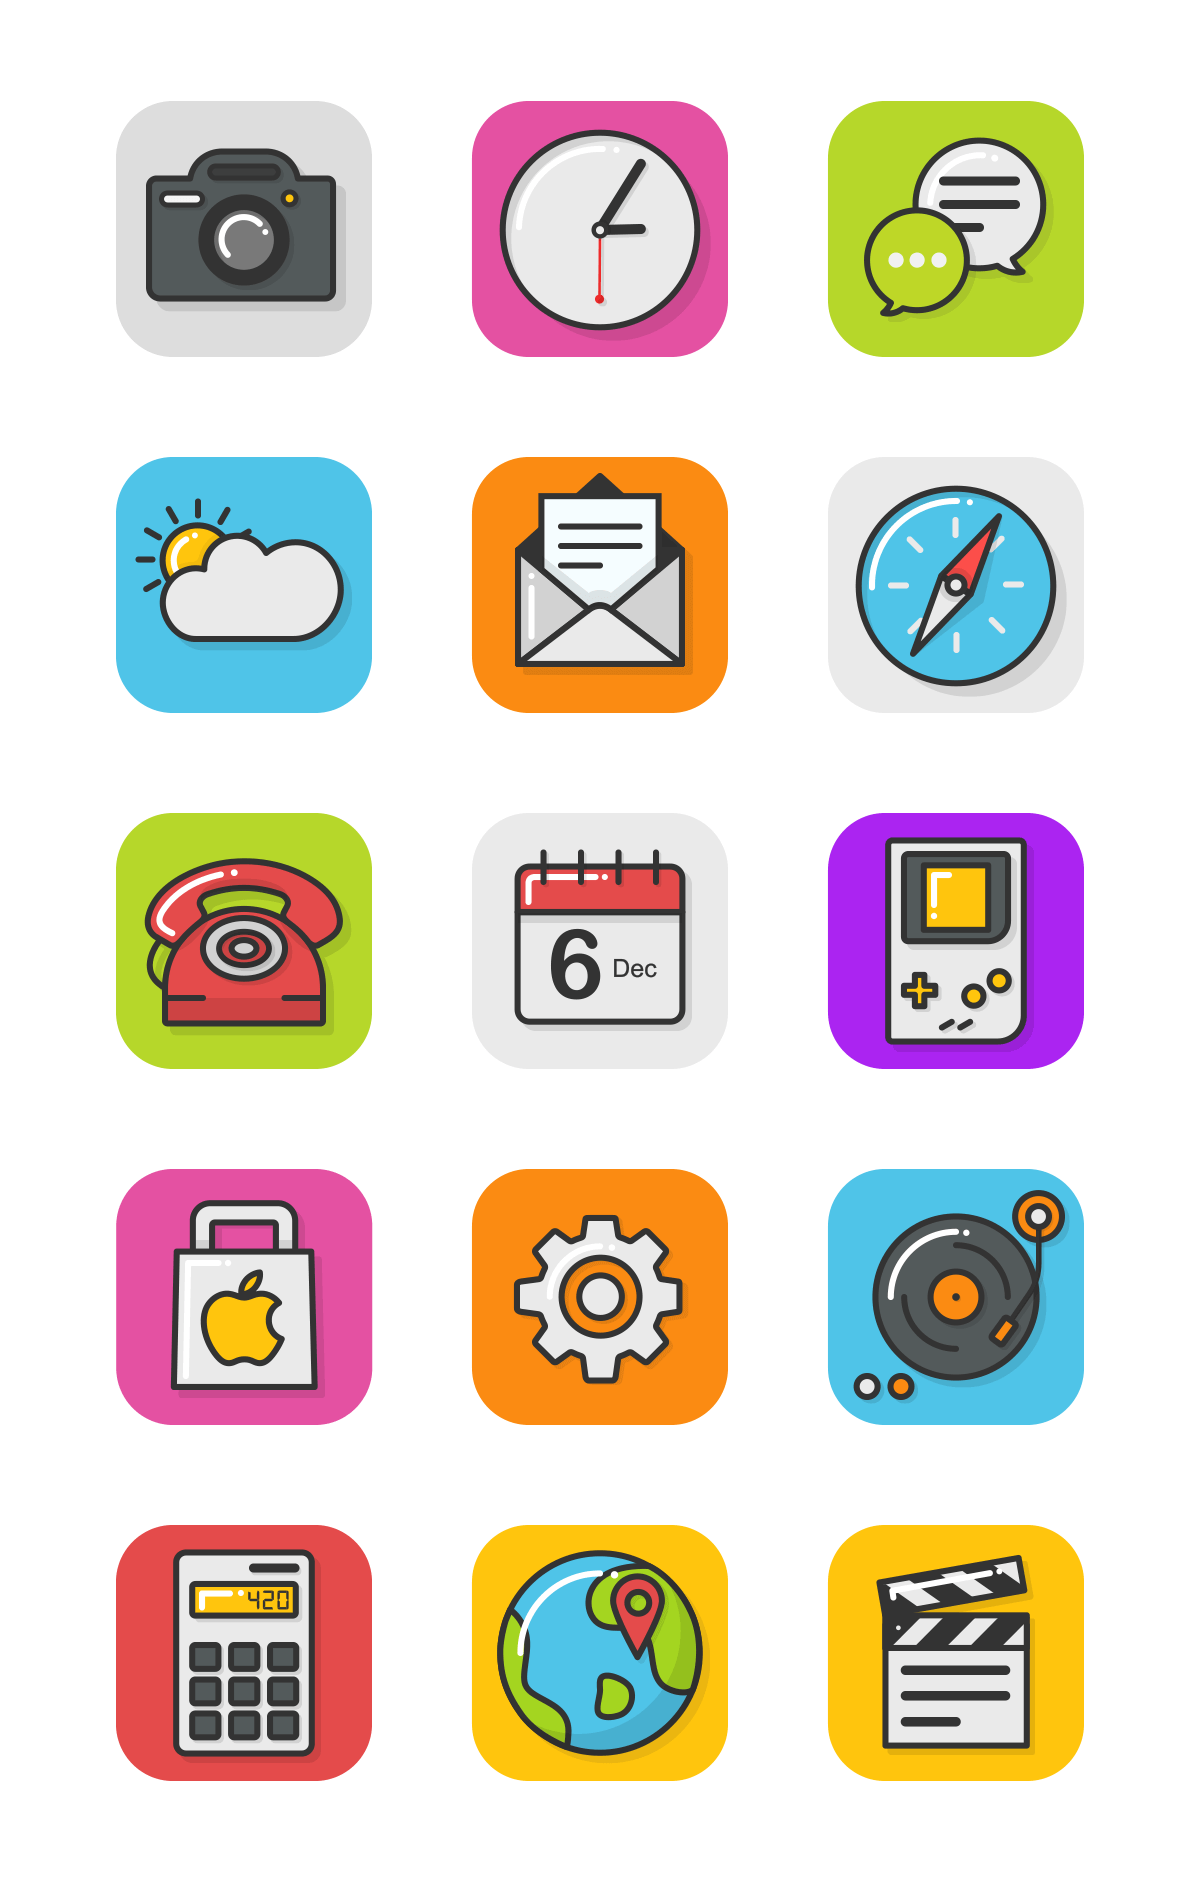 Free icons [gif] by Nick Frost - Dribbble